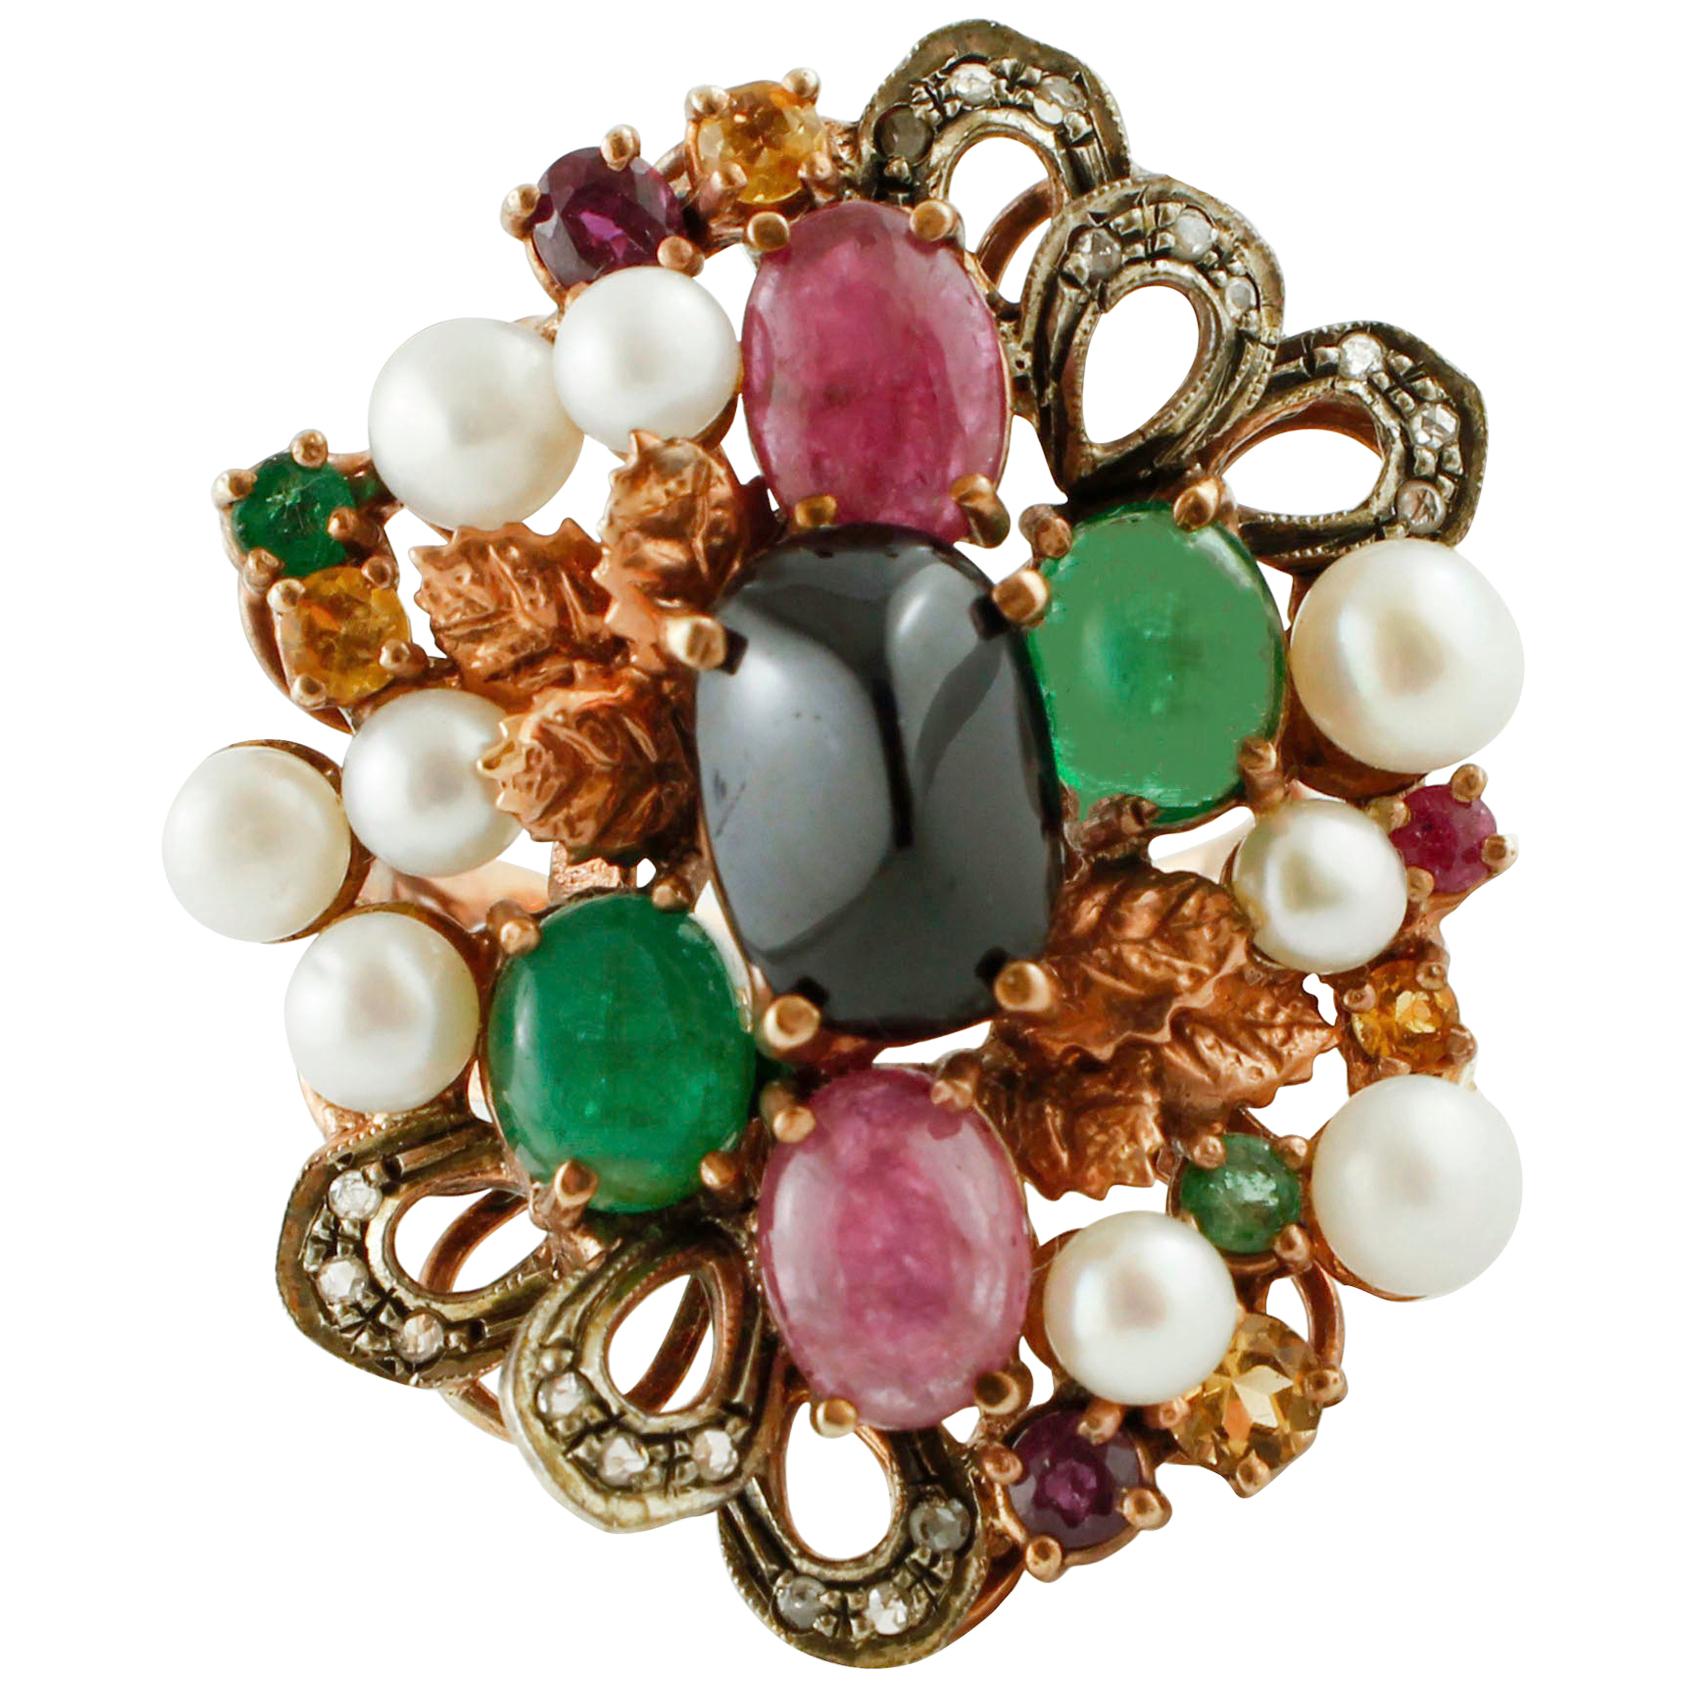 Diamonds, Emeralds, Rubies, Sapphires, Pearls, 9 Karat Rose Gold and Silver Ring